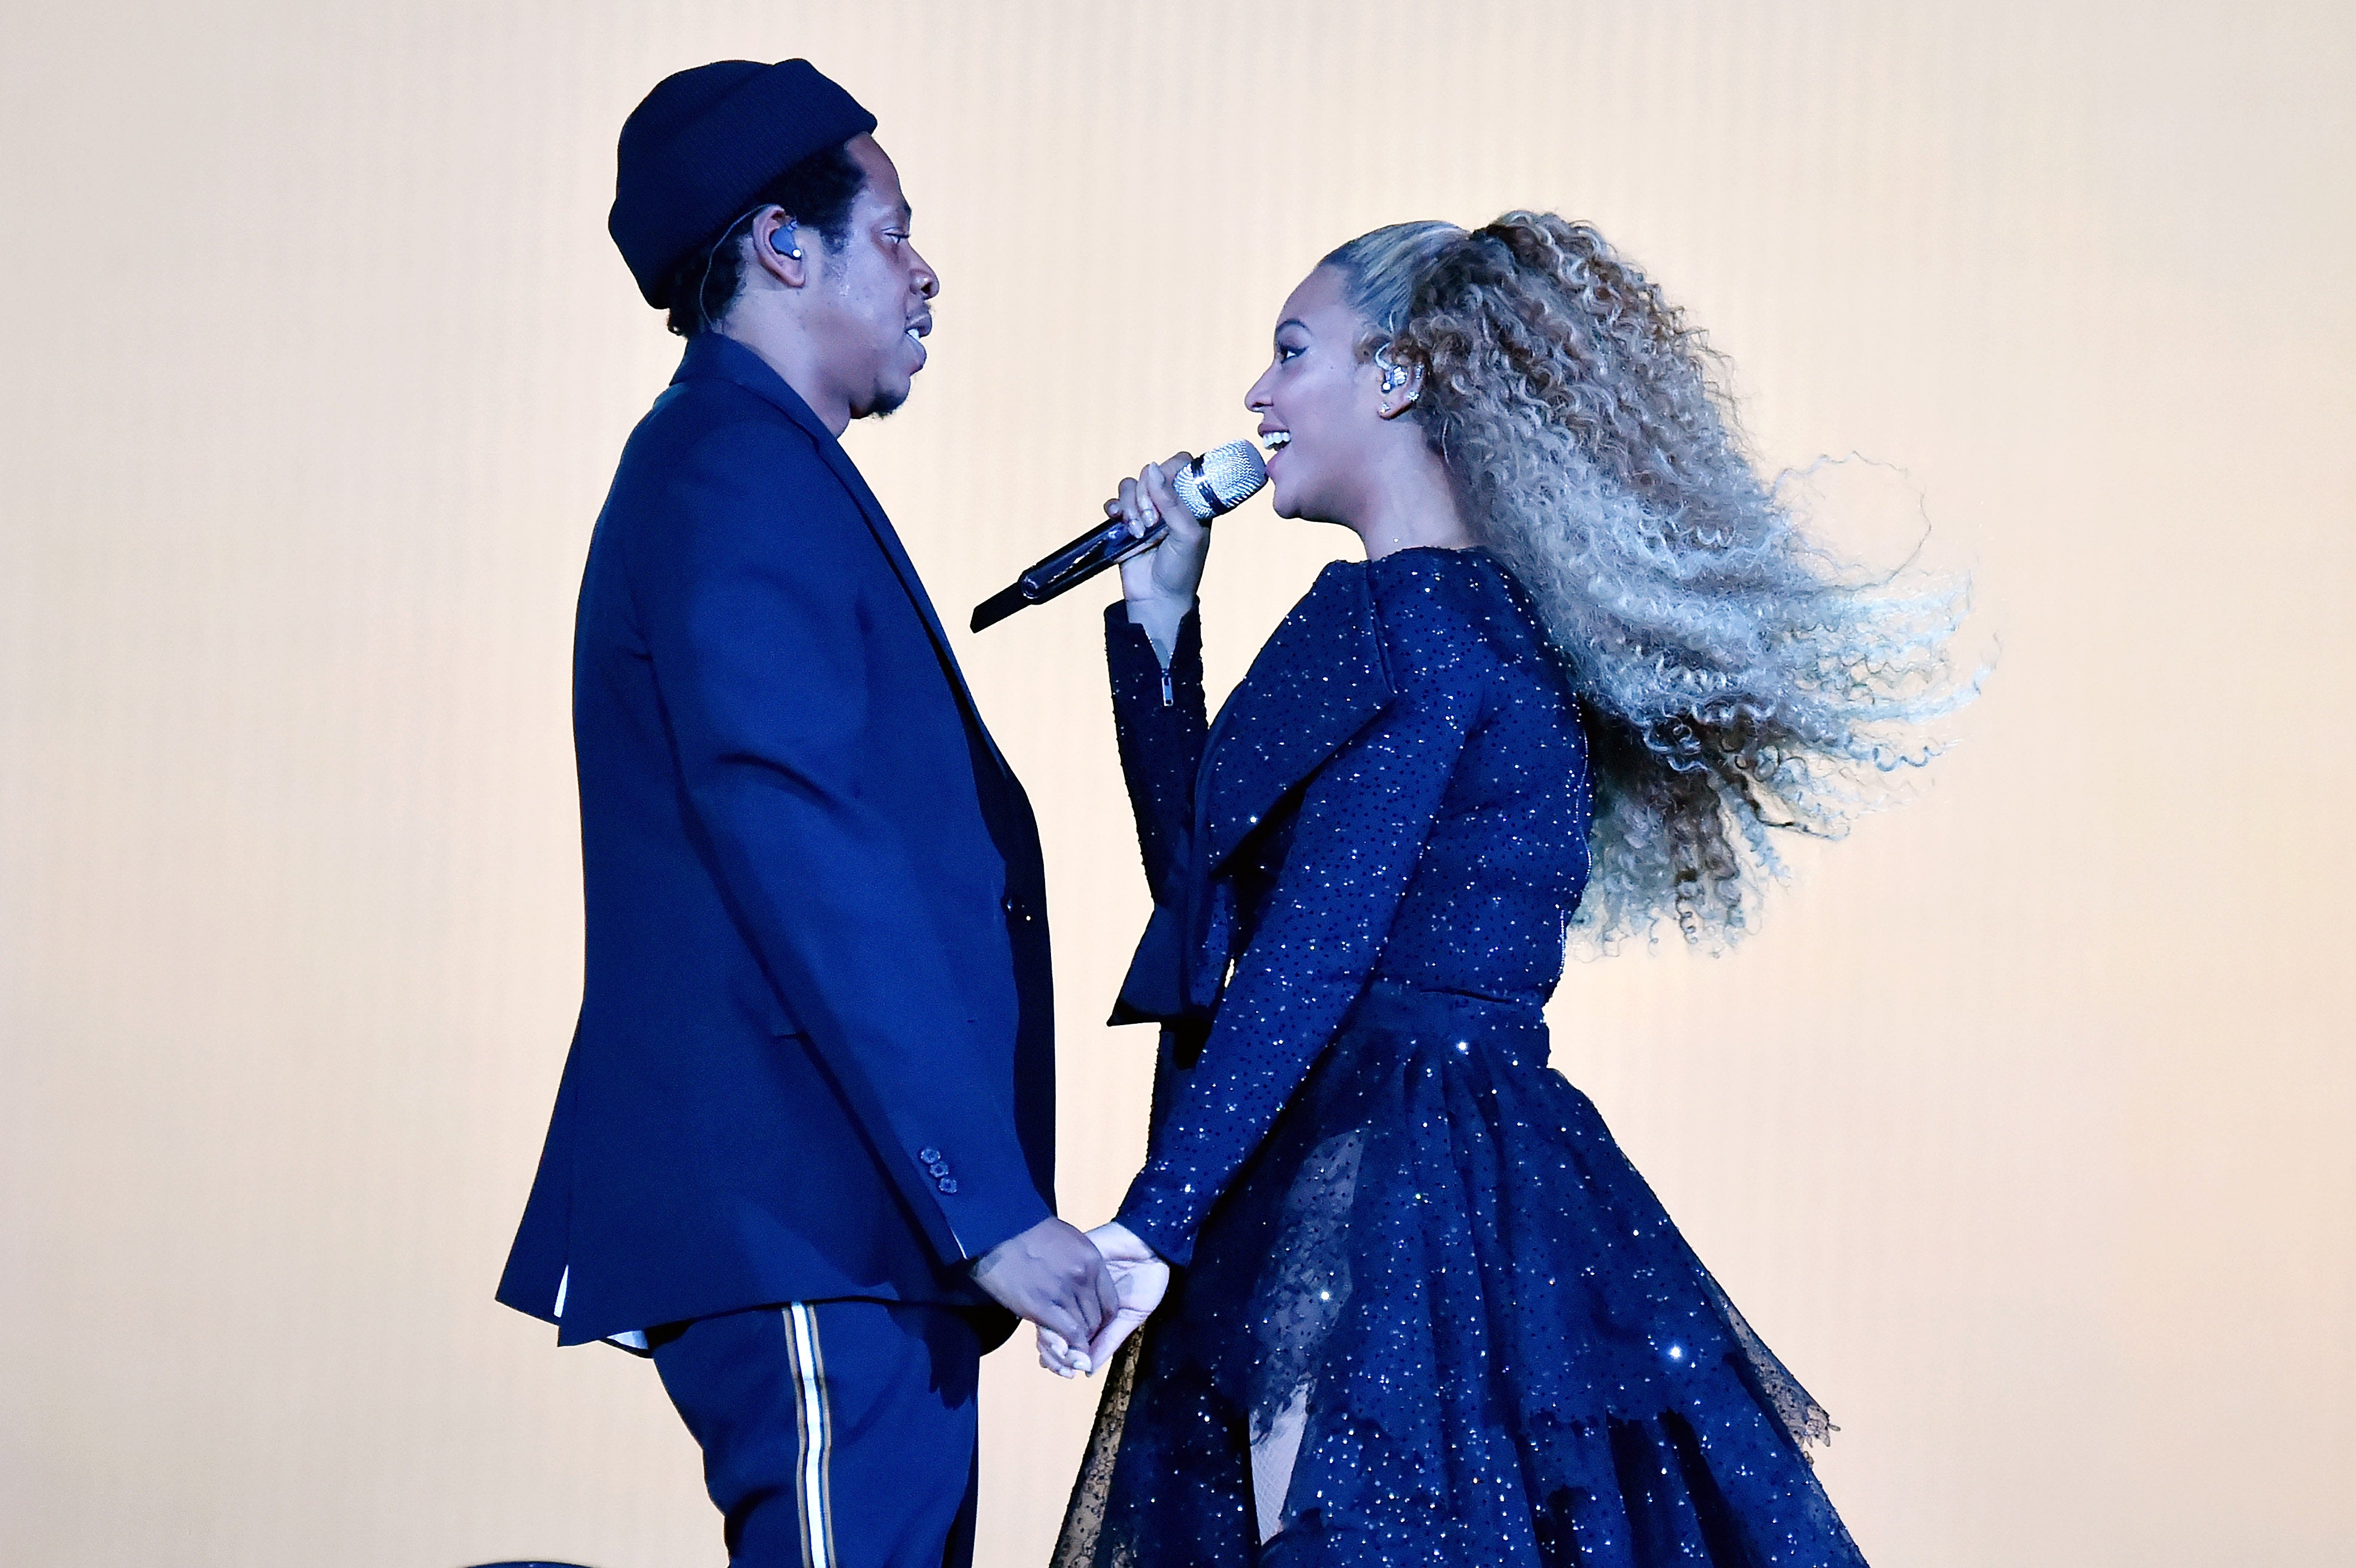 15 Lyrics From Beyonce And Jay-Z's Joint Album That Celebrate And Encourage Black Excellence
